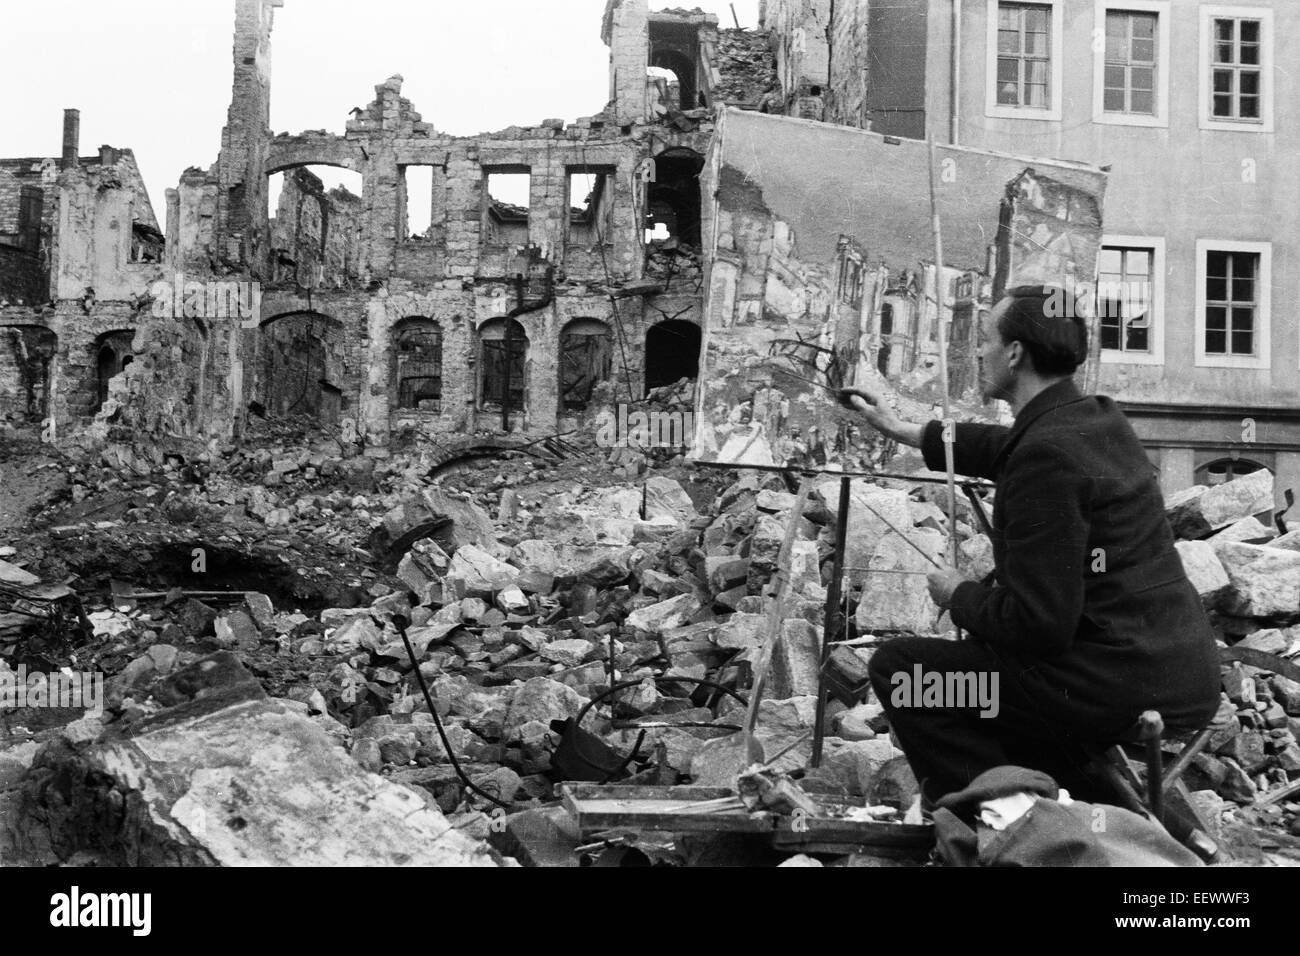 The photo by famous photographer Richard Peter sen. shows the painter Theodor Rosenhauer in the midst of ruins in Dresden working on his oil painting 'View of the Japanese Palace after the Bombing'. The photo was taken after 17 September 1945. Especially the Allied air raids between 13 and 14 February 1945 led to extensive destructions of the city. Photo: Deutsche Fotothek/Richard Peter sen. - NO WIRE Stock Photo